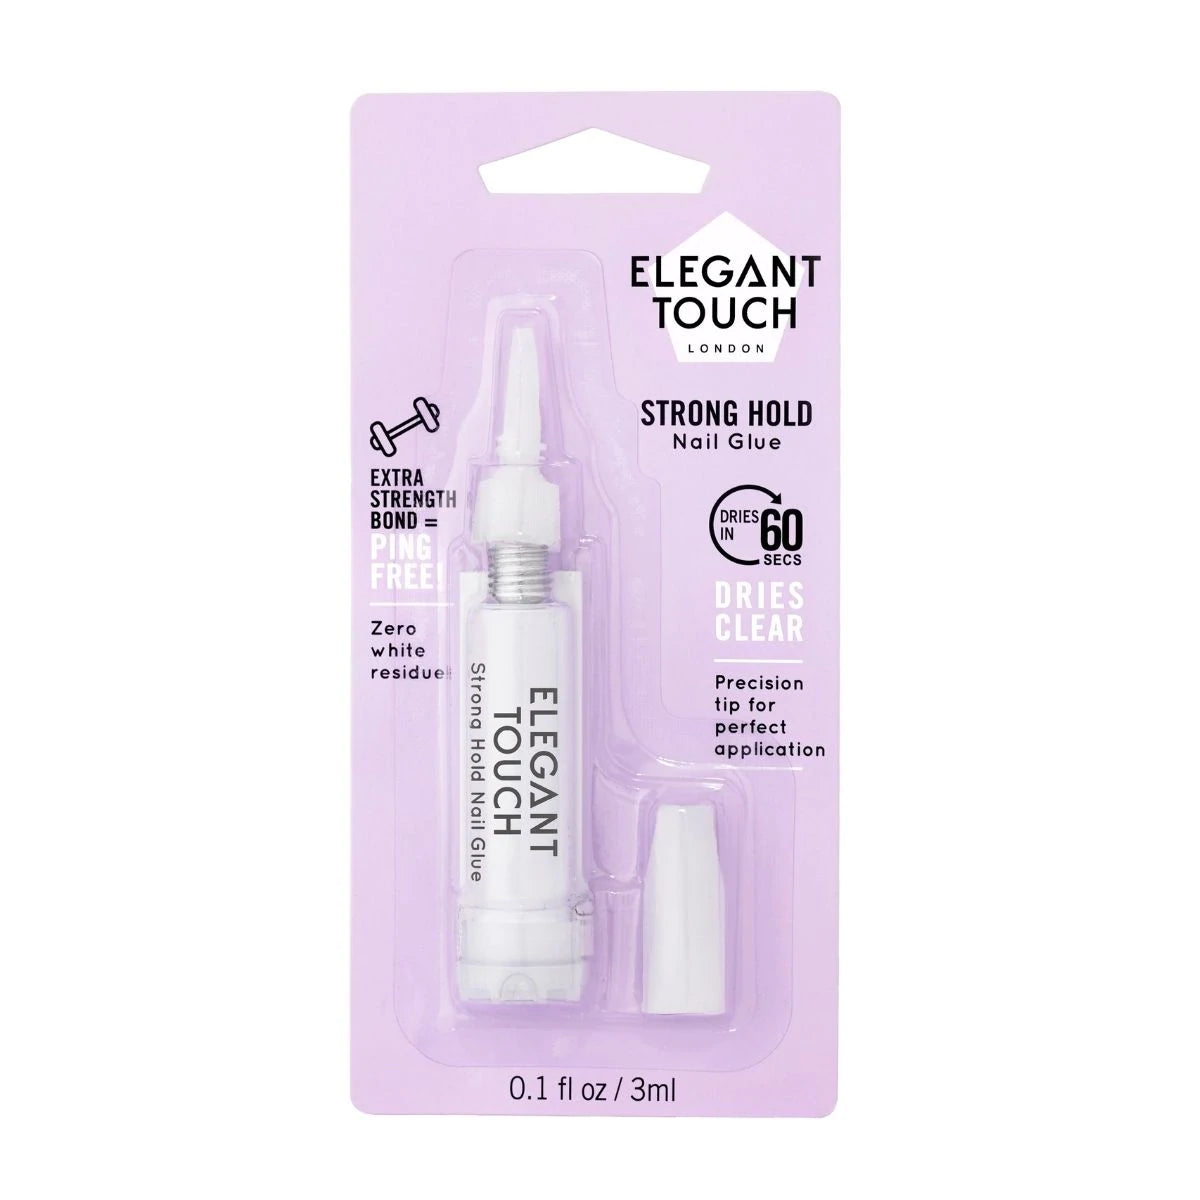 ET STRONG HOLD NAIL GLUE 3G